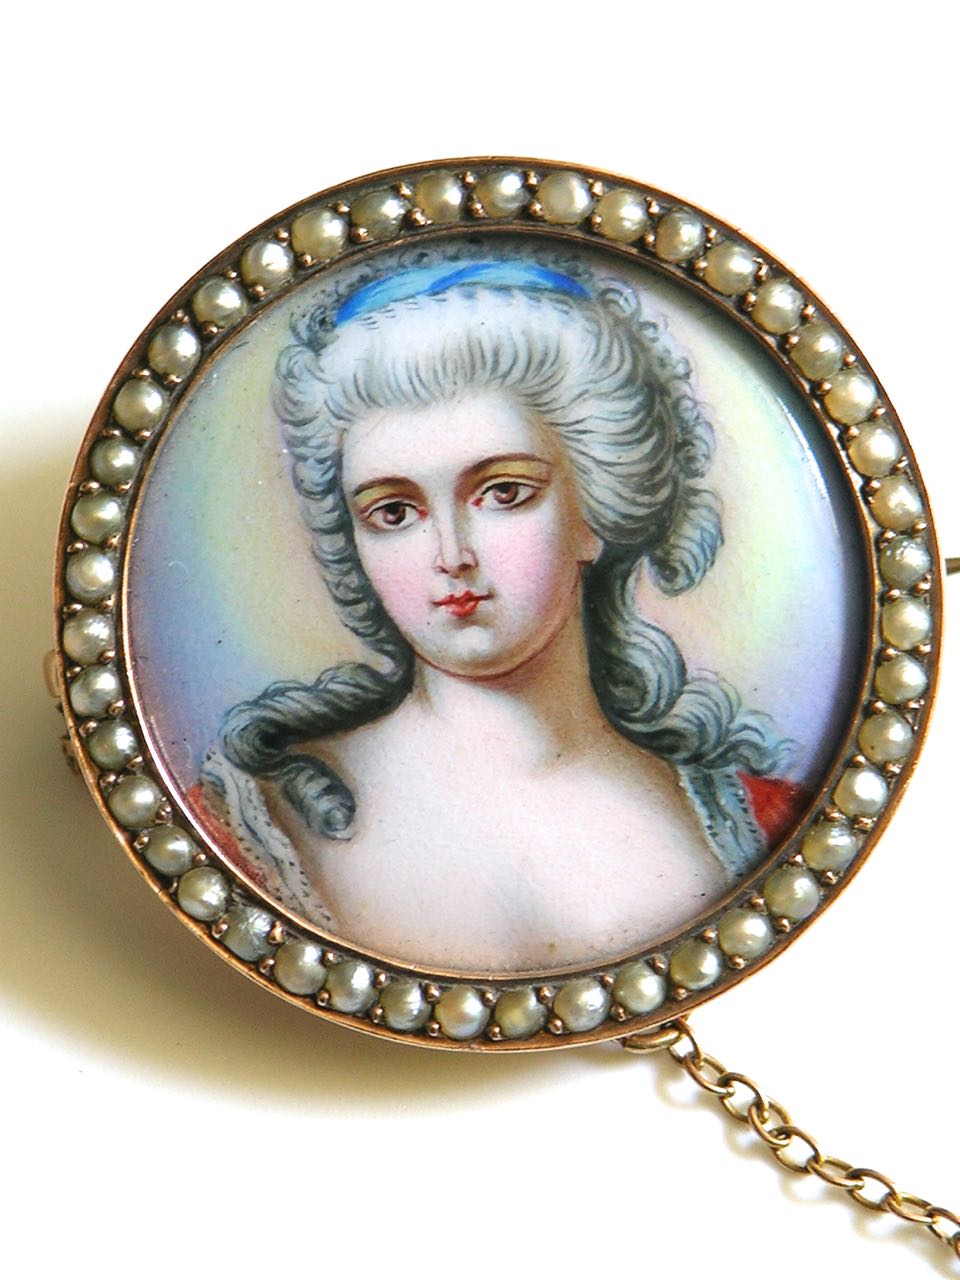 Antique 9k Rose Gold Enamel and Seed Pearl Portrait Miniature Brooch